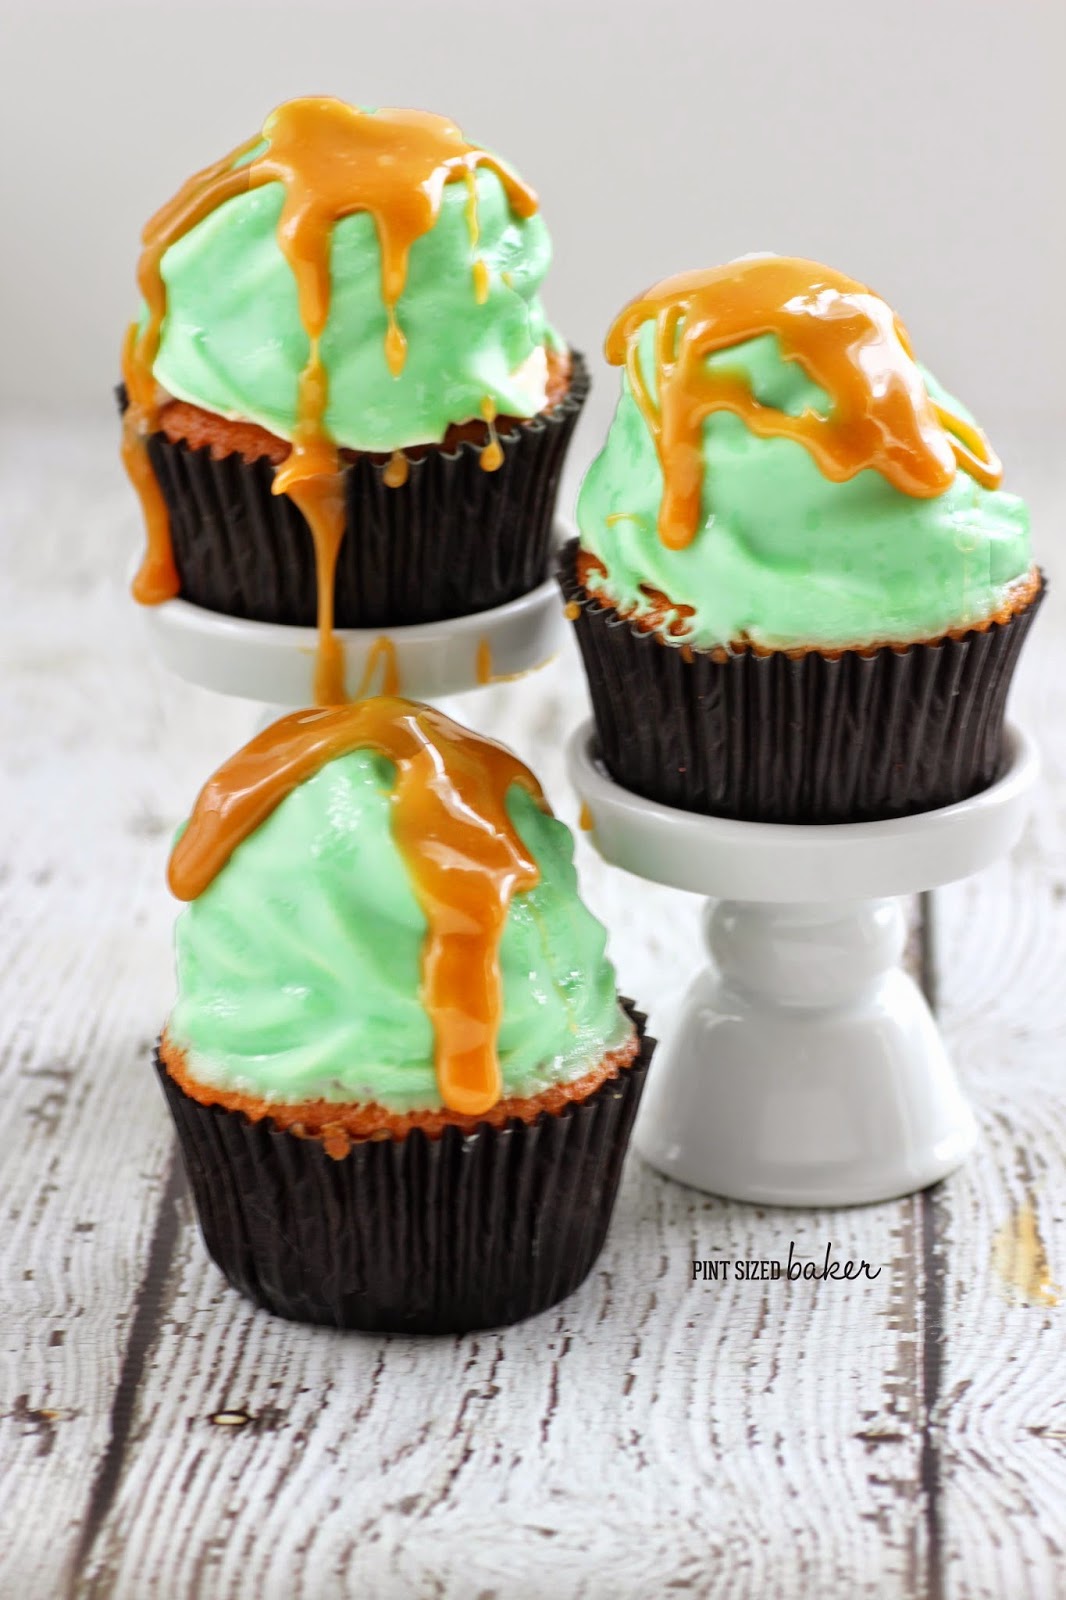 Green Apple High Hat Cupcakes drizzled with caramel sauce are easier to eat than a real caramel apple.